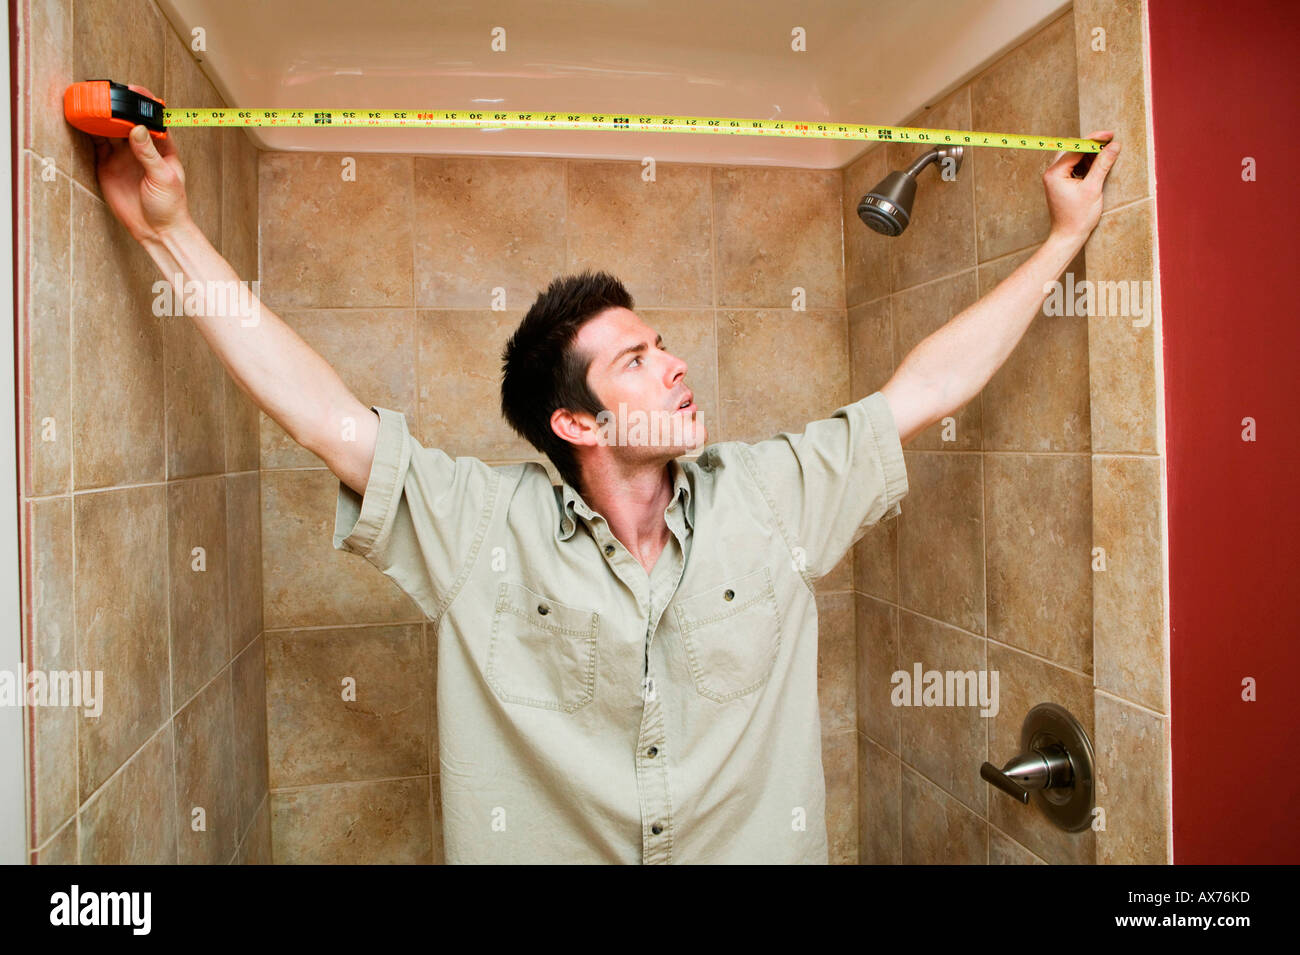 Young man measuring the width of the bathroom with a tape measure Stock Photo